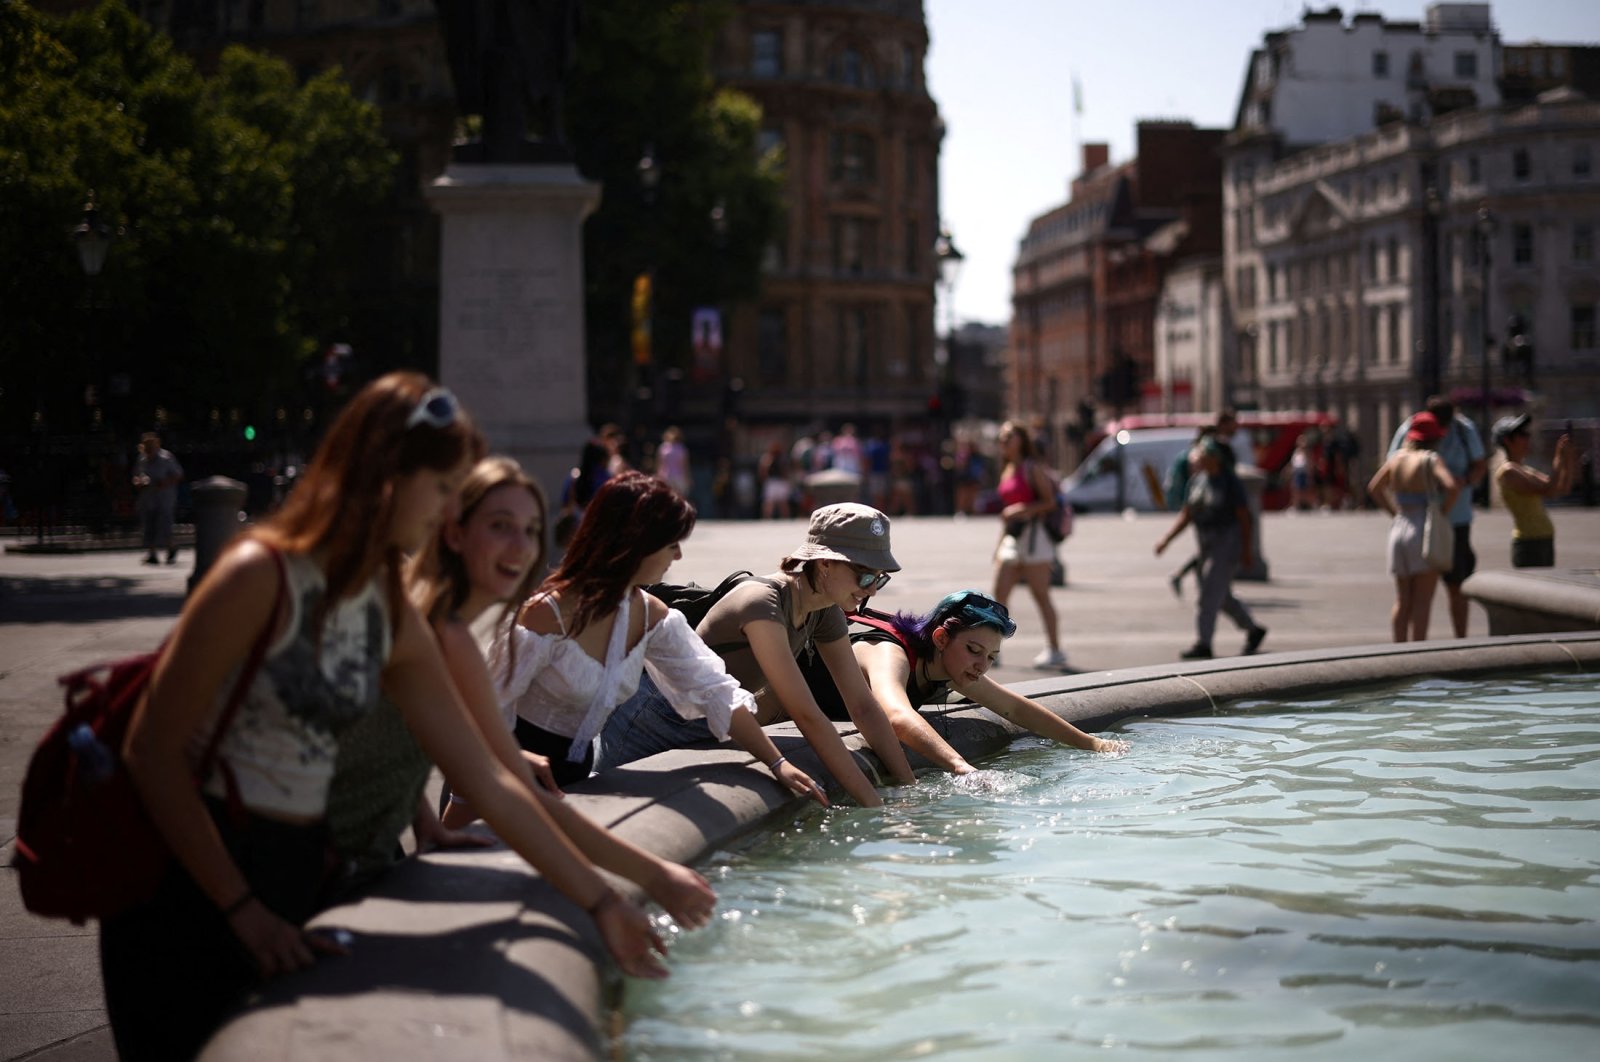 People cool off in a water fountain during a heatwave, at Trafalgar Square in London, U.K., July 19, 2022. (Reuters Photo)